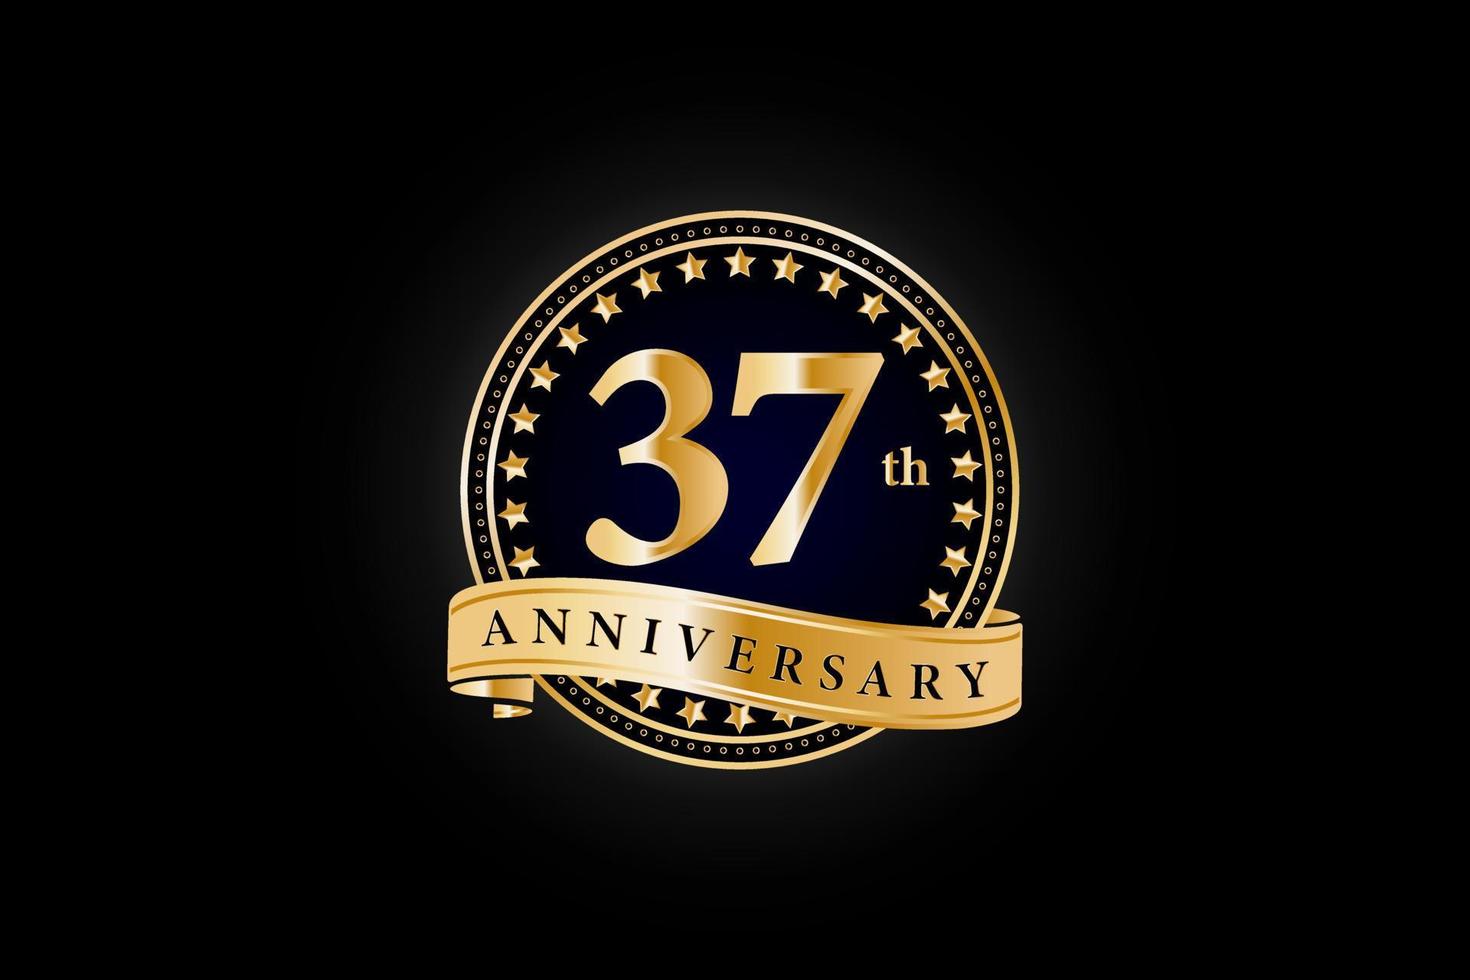 37th Anniversary golden gold logo with ring and gold ribbon isolated on black background, vector design for celebration.